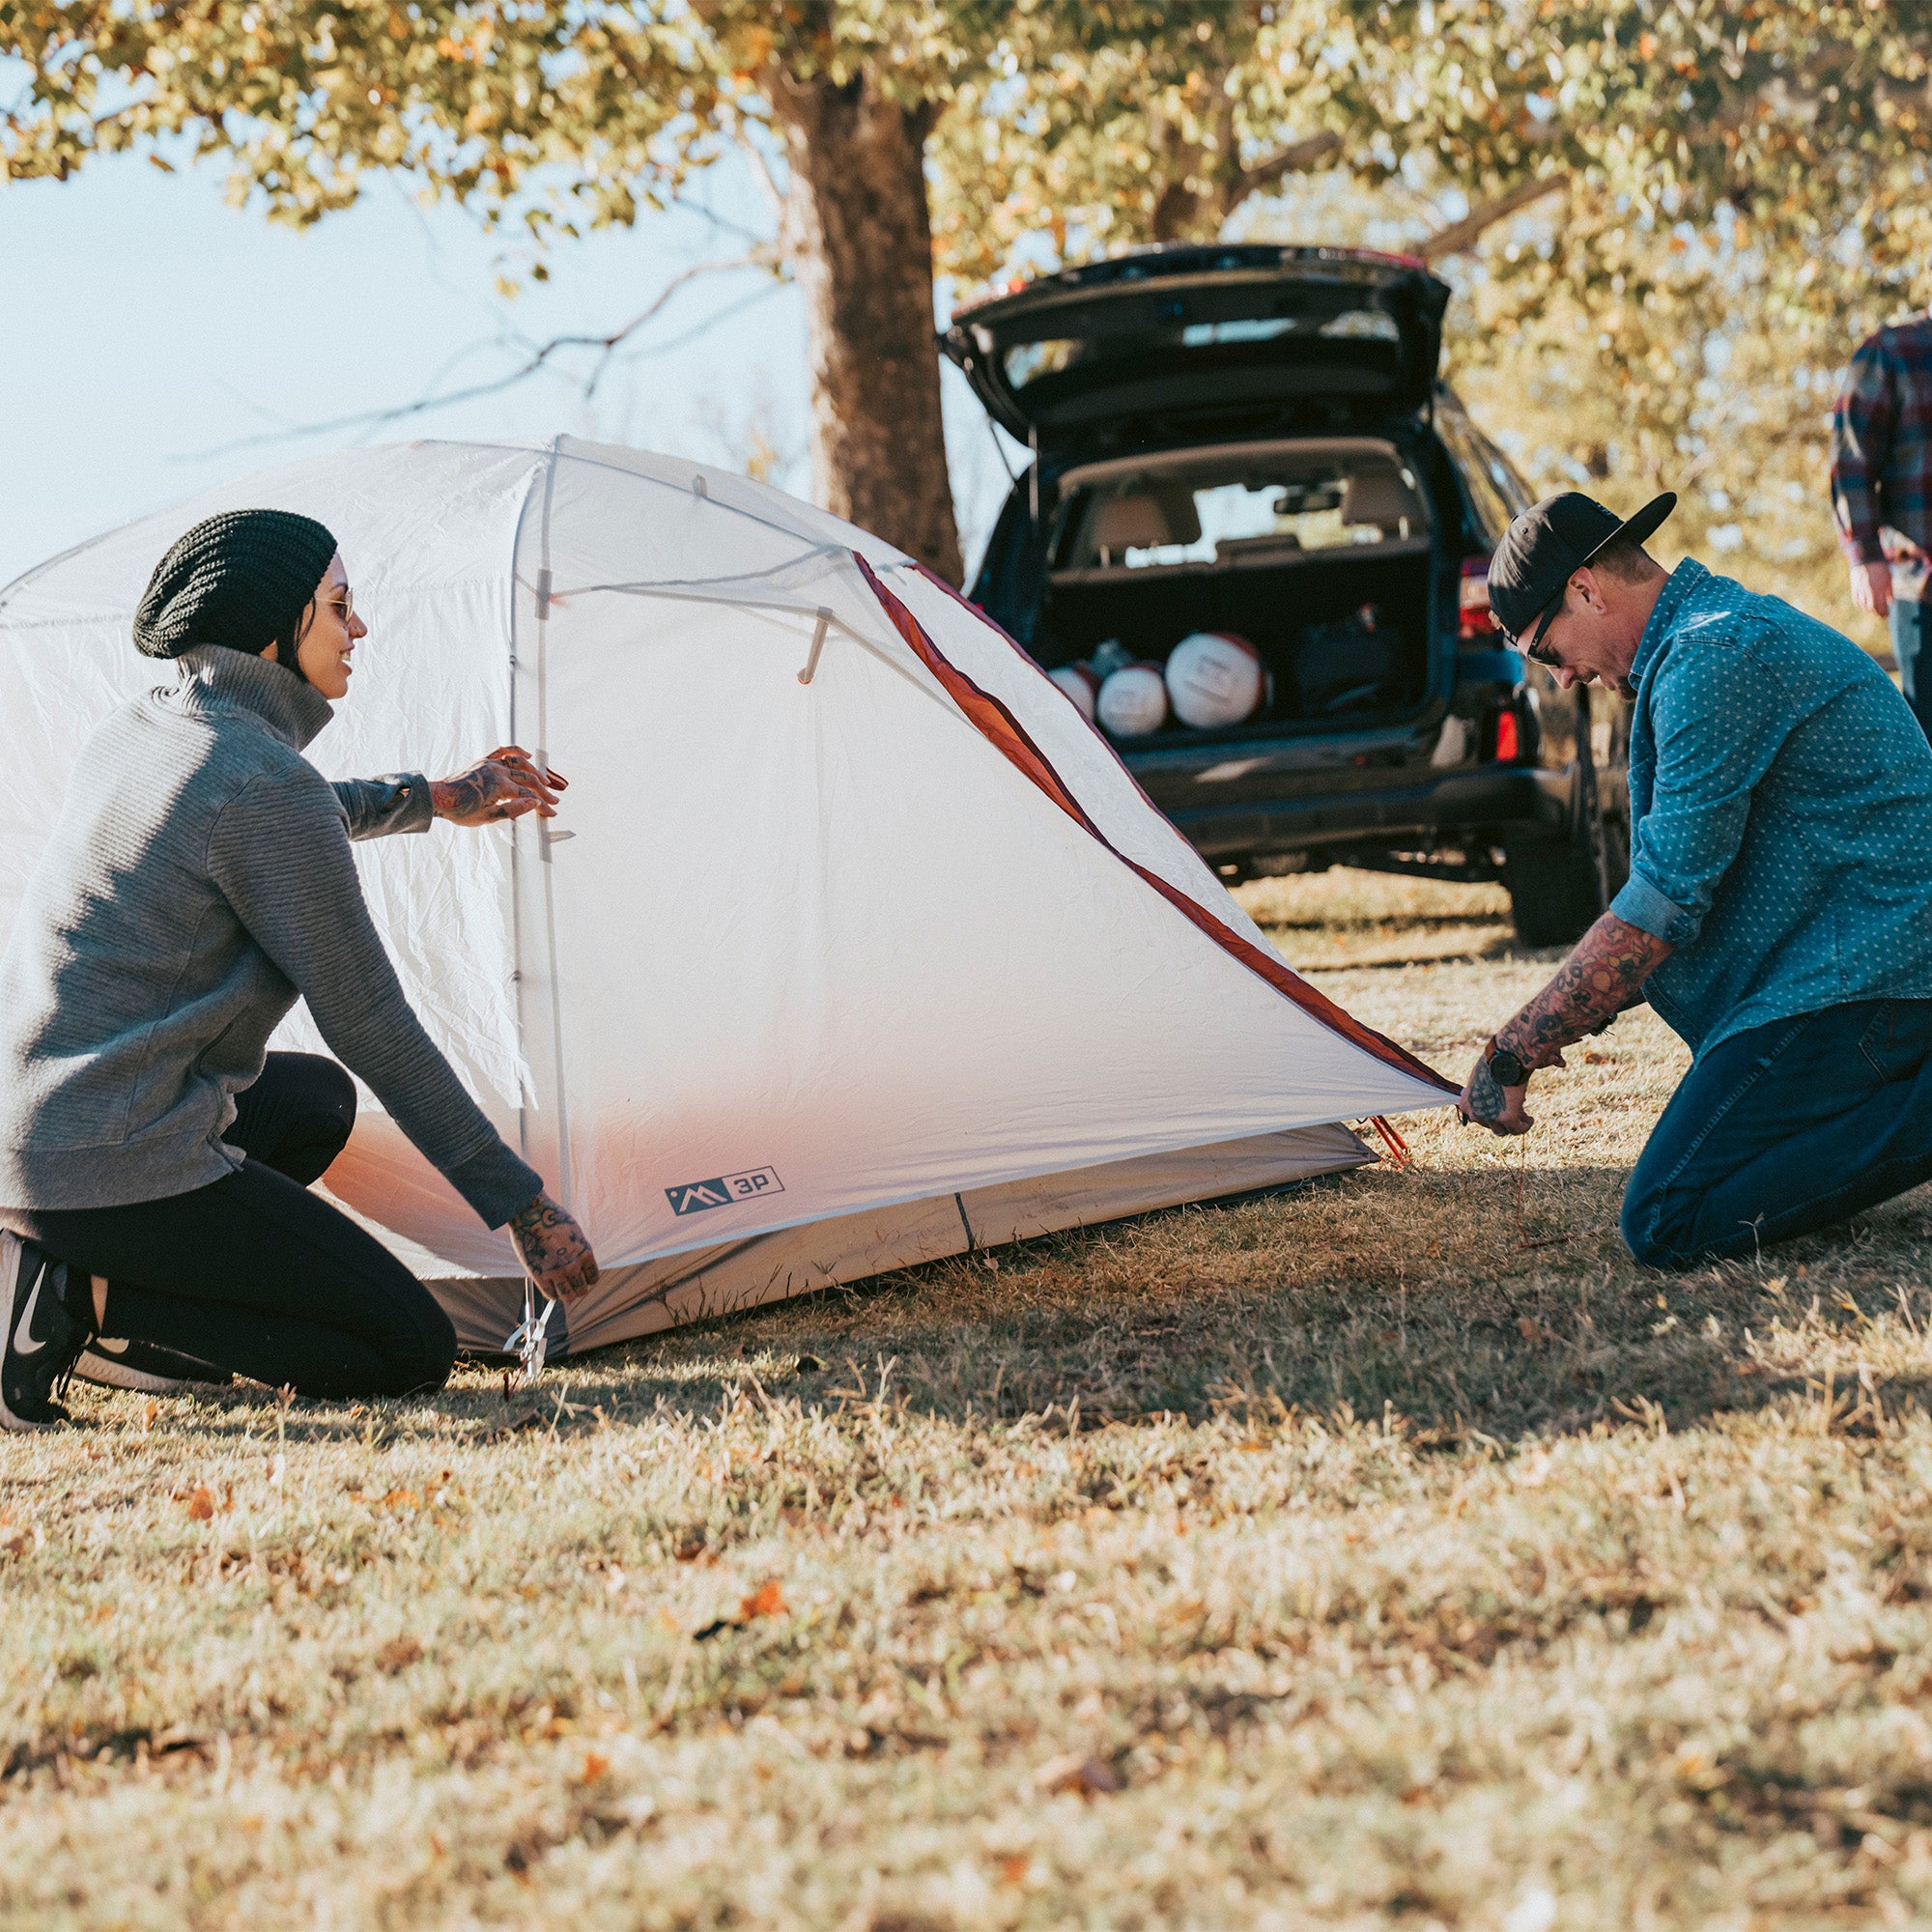 Ultralight Backpacking Tent | 3 Person